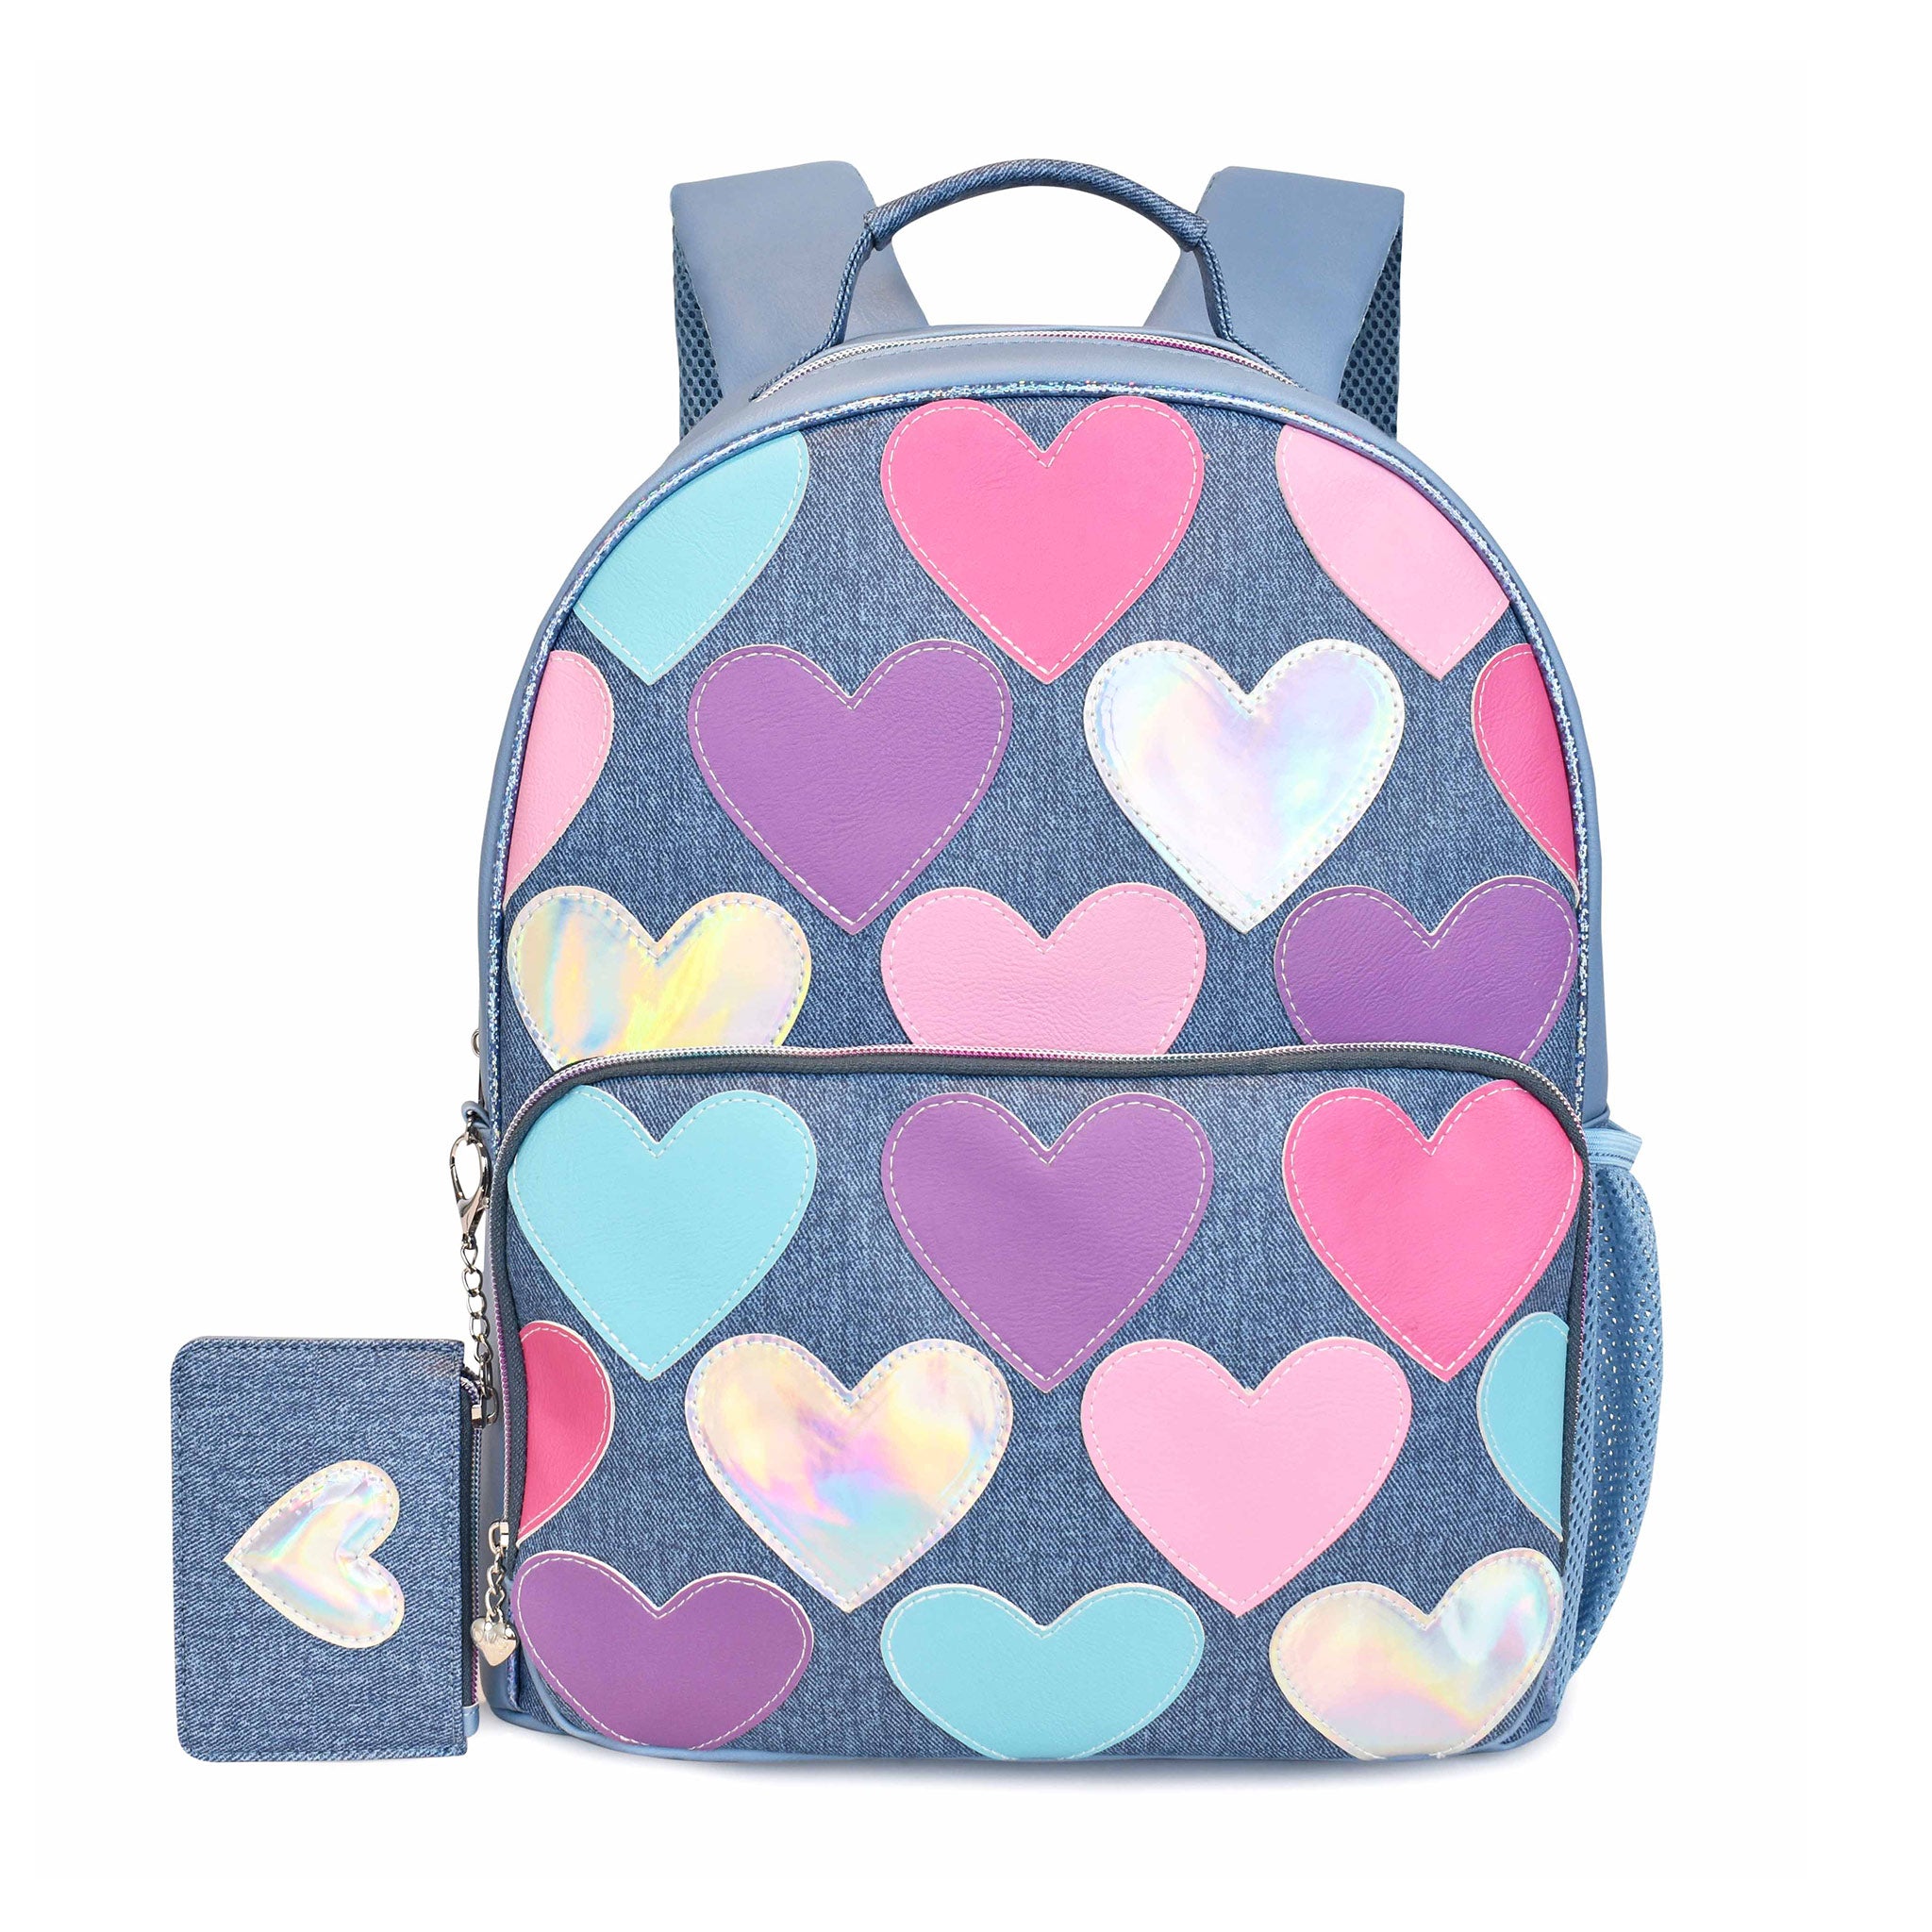 Front view of a denim large backpack covered in heart patches with a matching coin purse